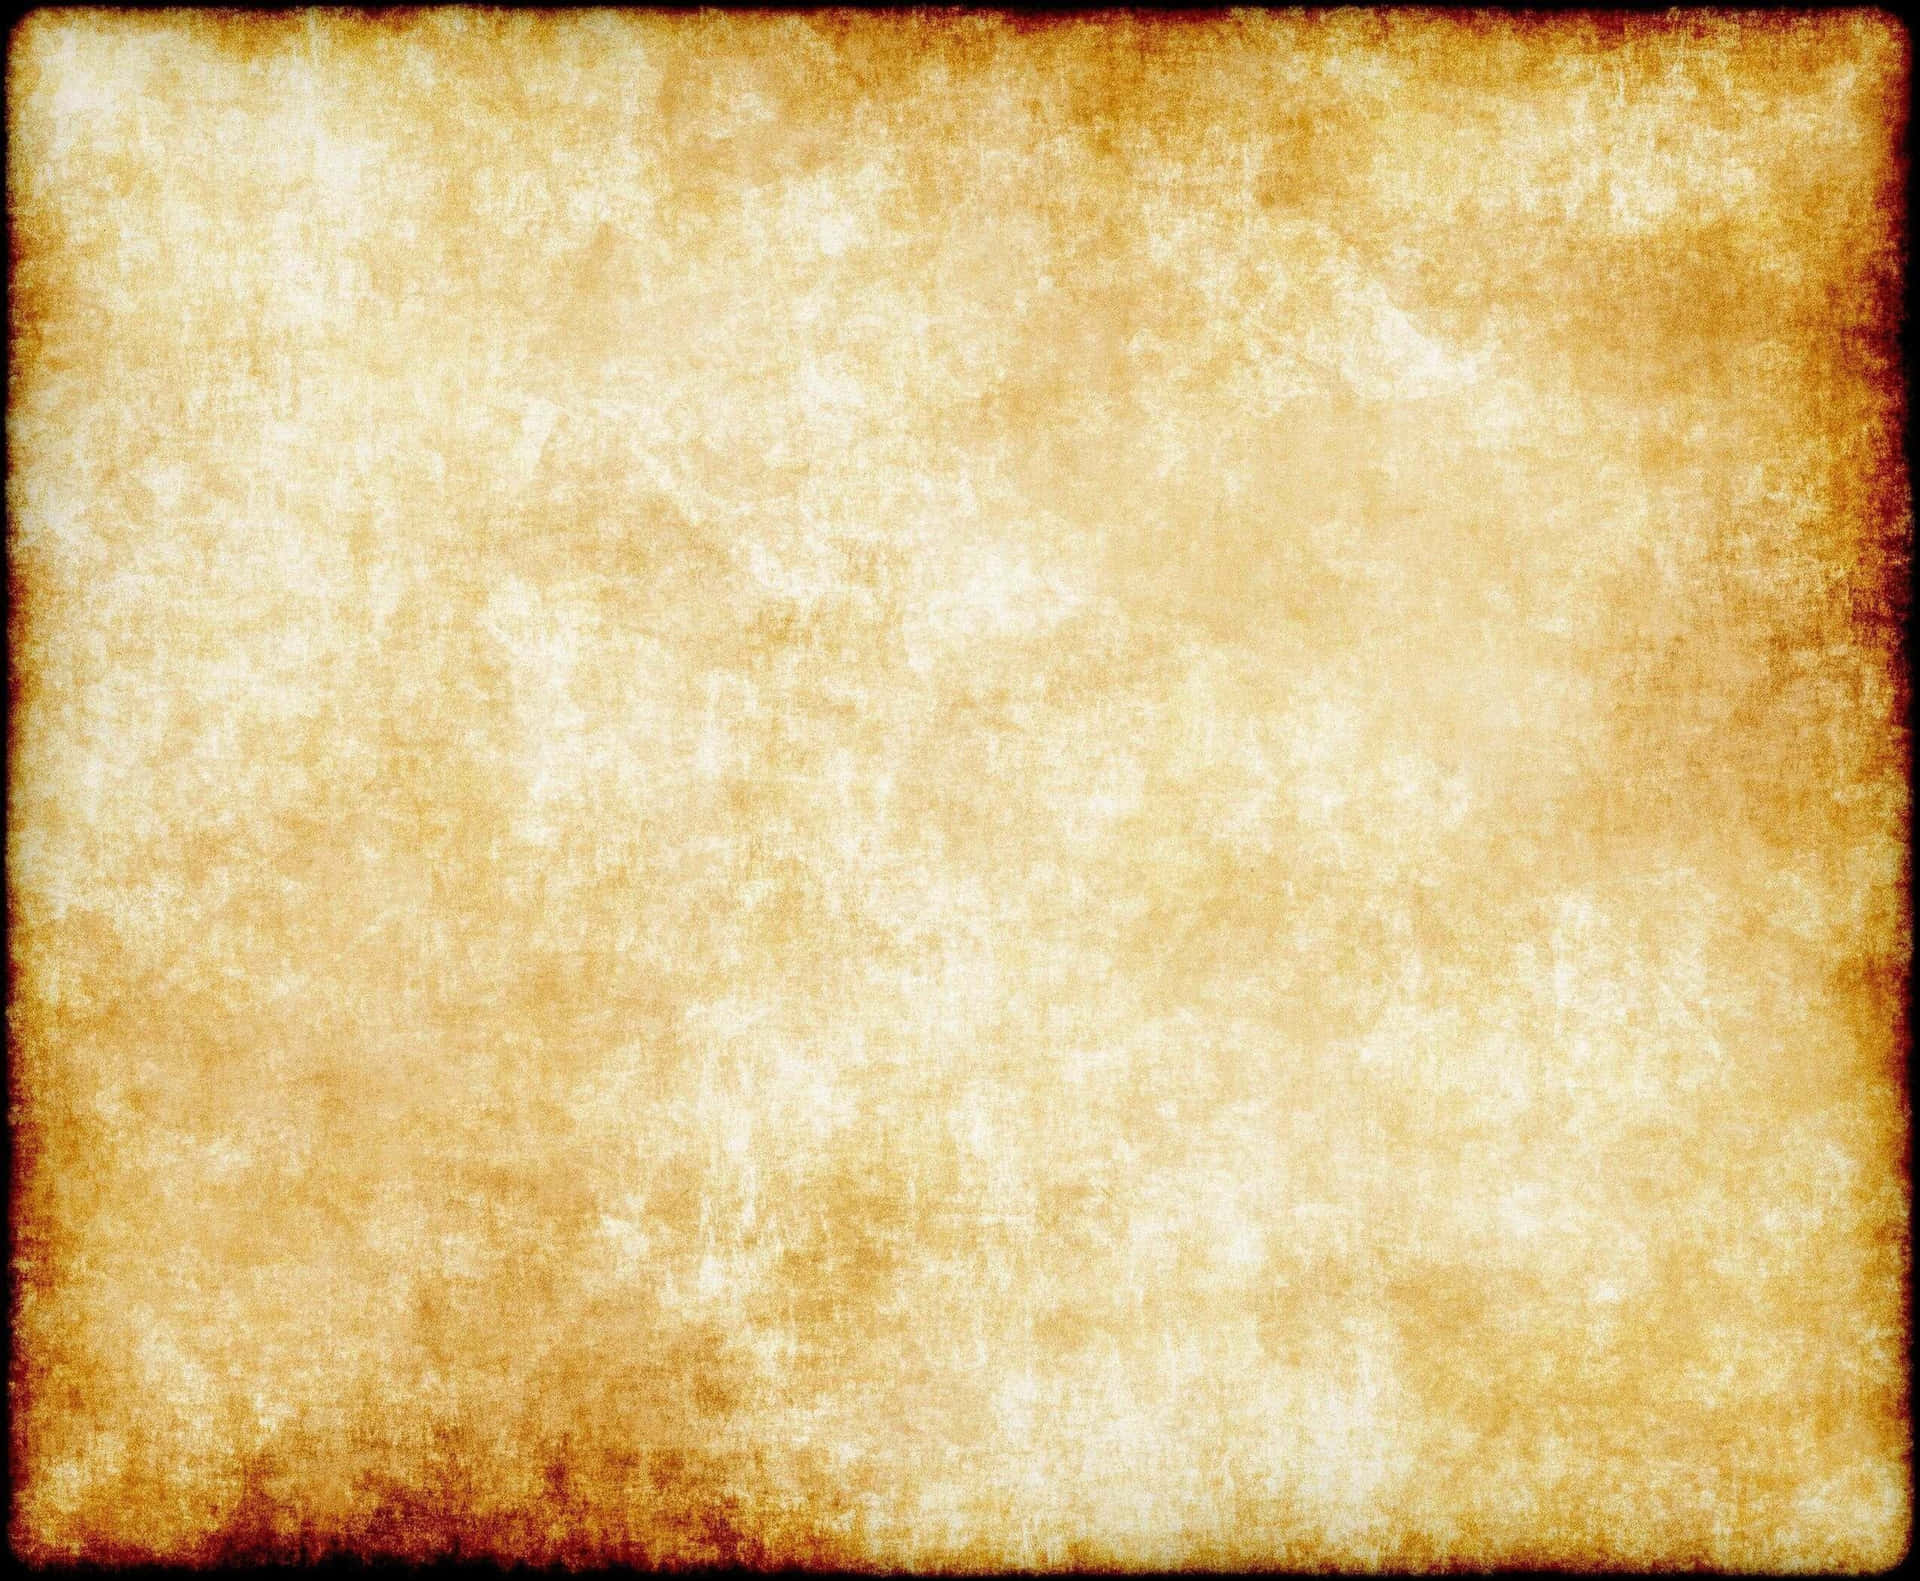 Vintage Paper Texture with Rusty Colored Old Edges